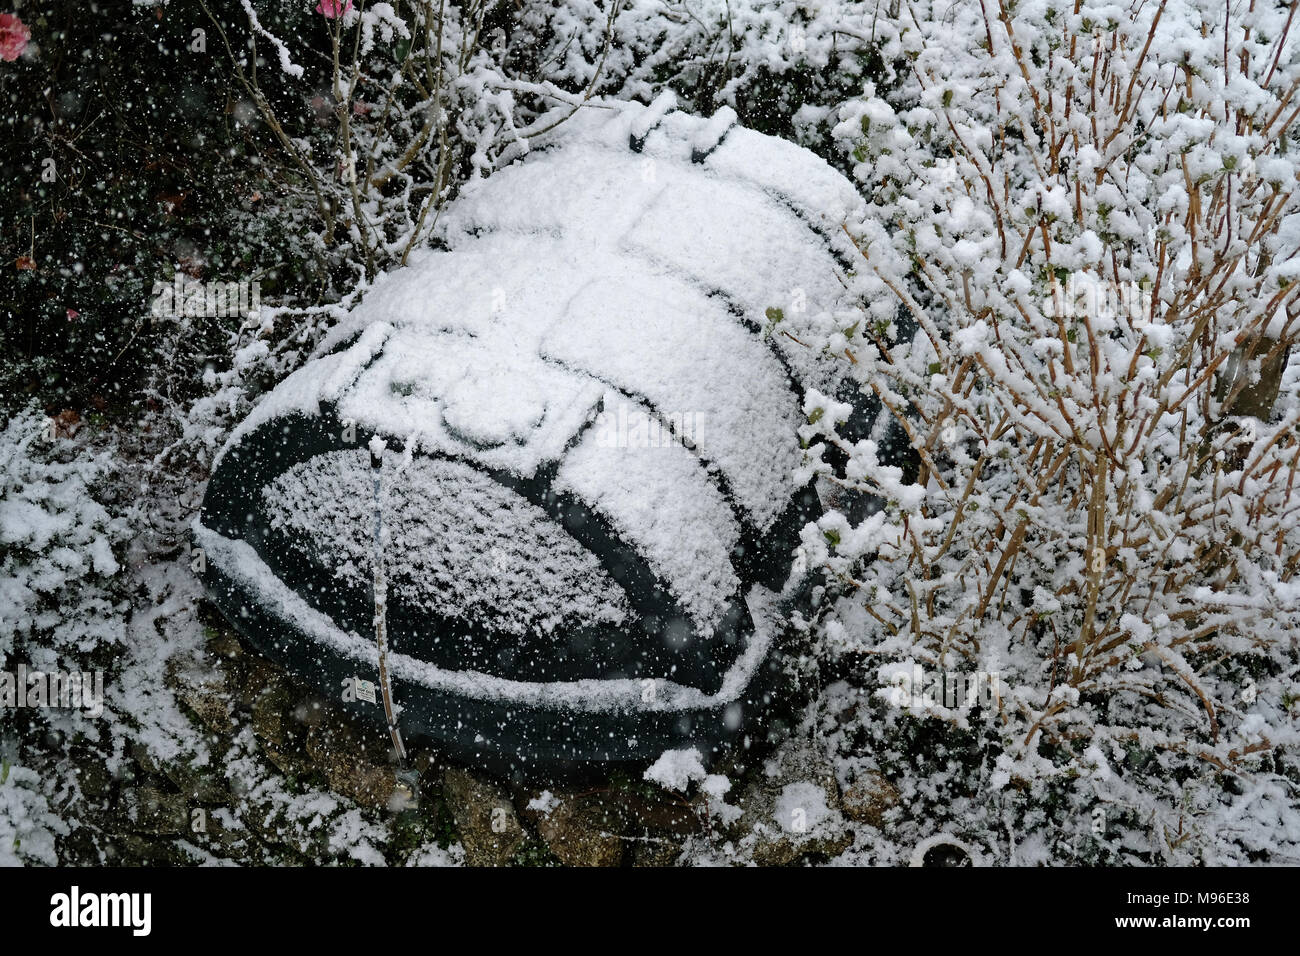 A domestic oil tank covered in snow Stock Photo